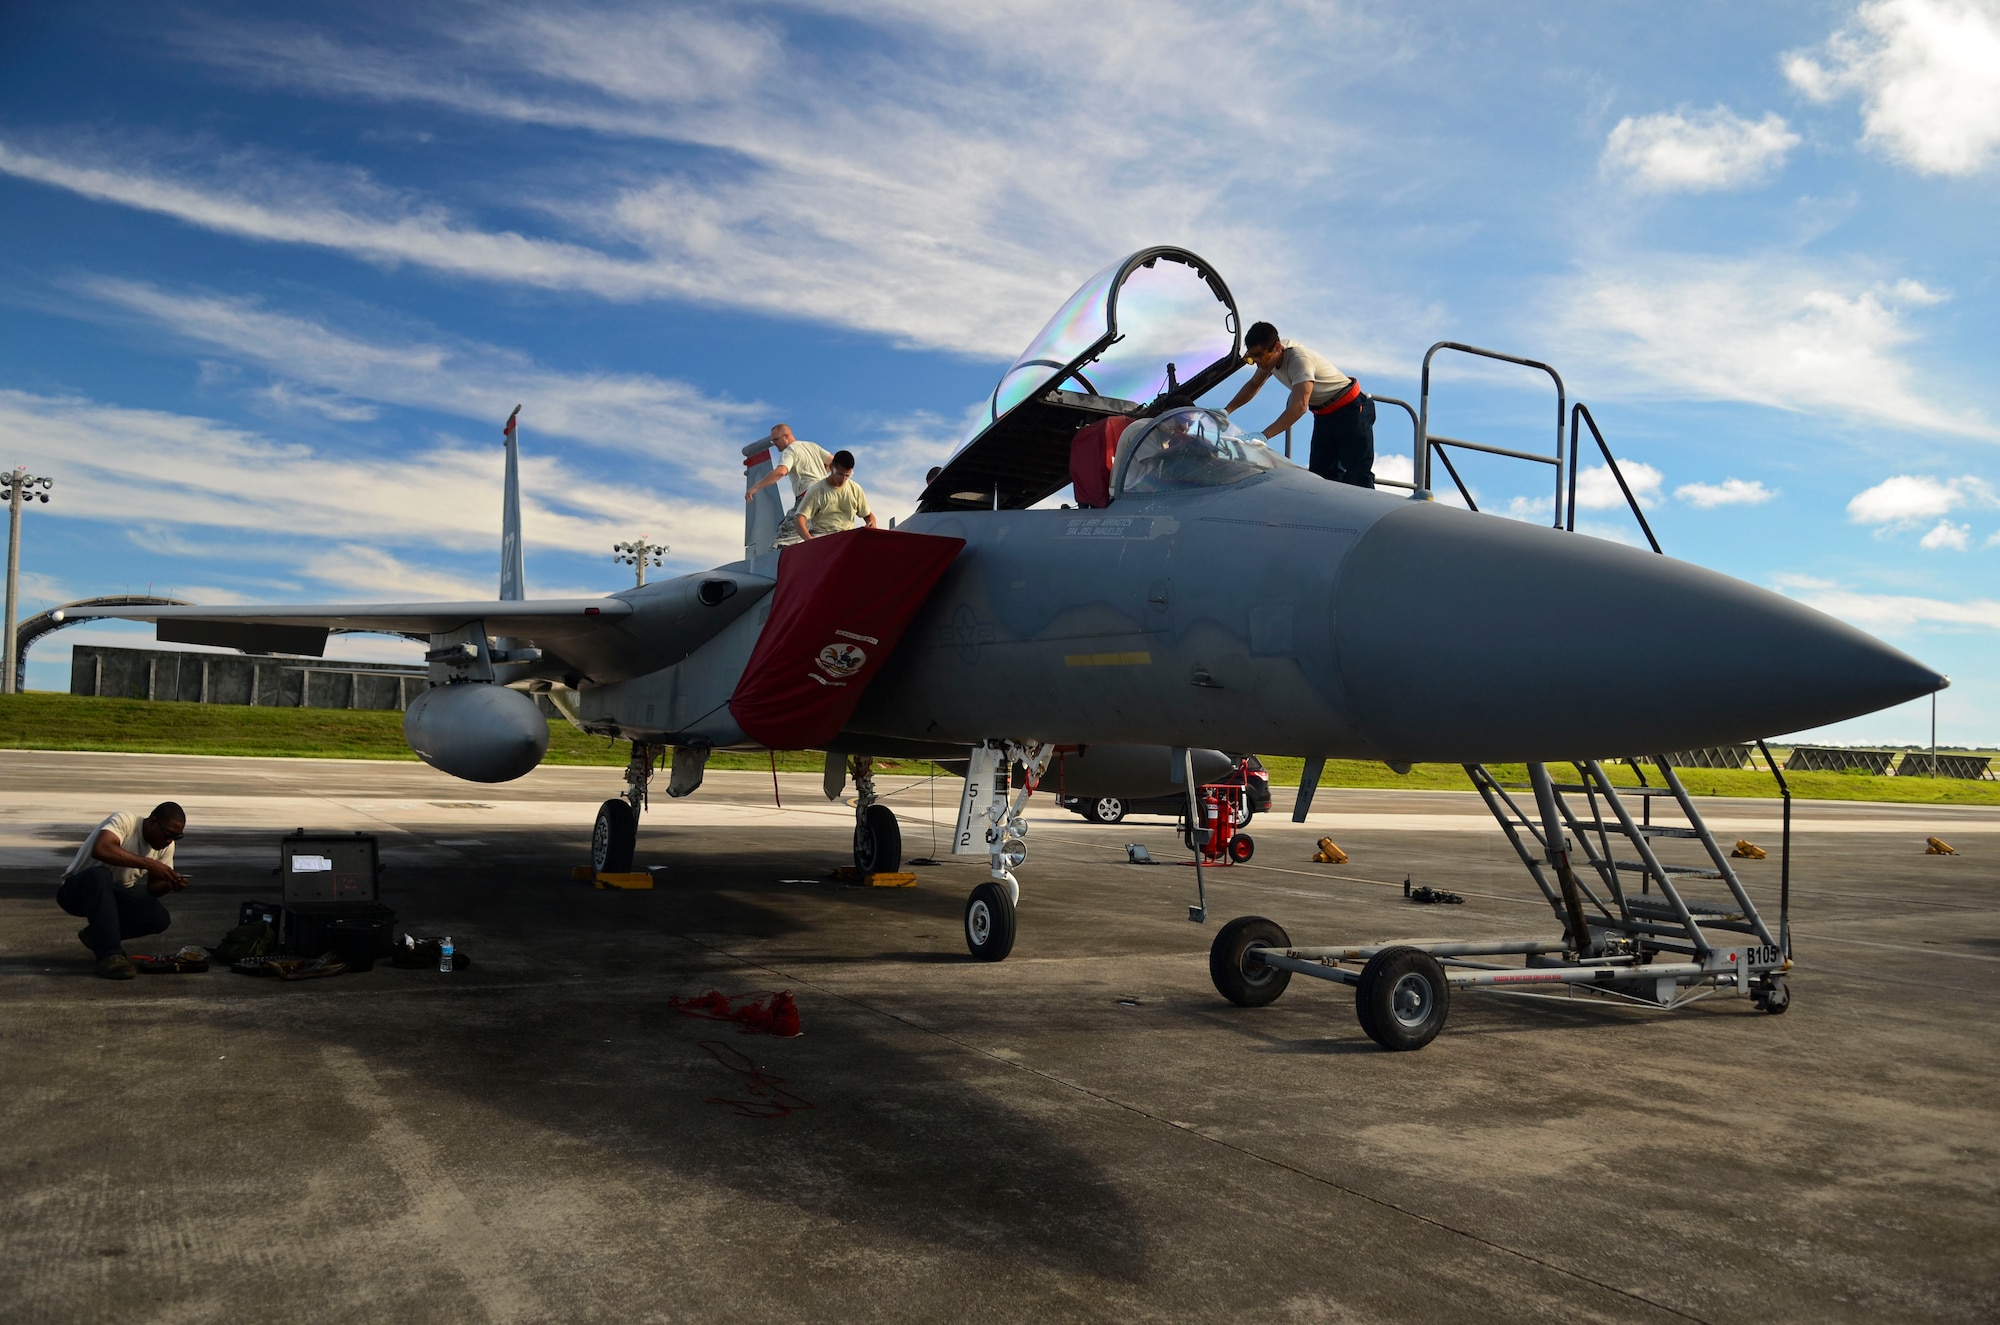 Airmen from the 18th Maintenance Group from Kadena Air Base, Japan, conduct pre-flight maintenance on an F-15 Eagle Aug. 27, 2013, on the Andersen Air Force Base, Guam, flightline. The F-15s were scheduled to return the same day back to Kadena Air Base, Japan, after completing the Aviation Relocations Program. (U.S. Air Force photo/Airman 1st Class Marianique Santos)